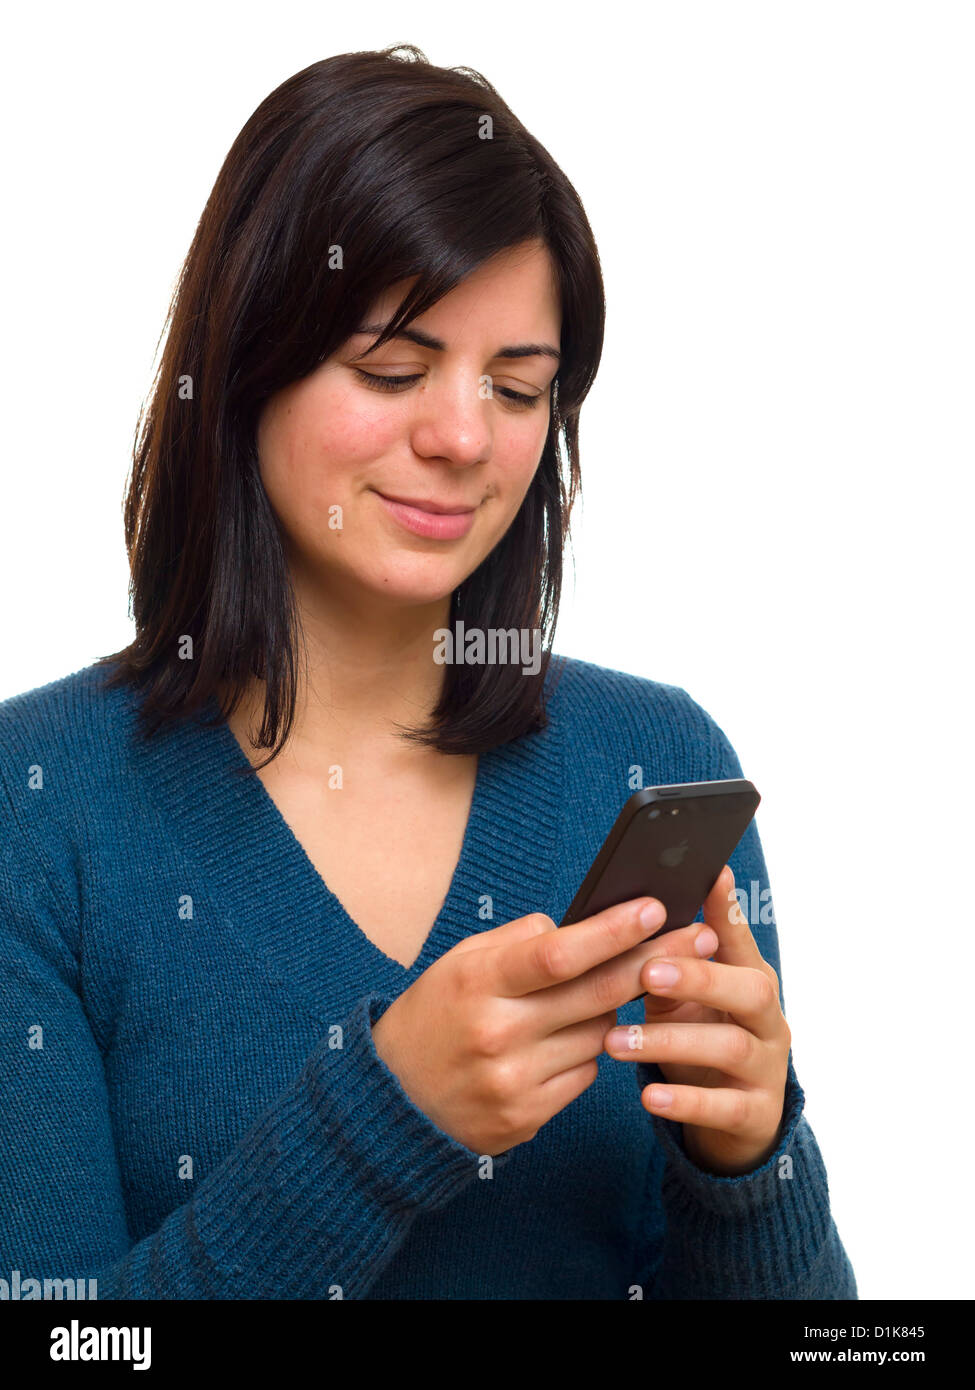 Smiling young woman texting on an iPhone 5 Stock Photo